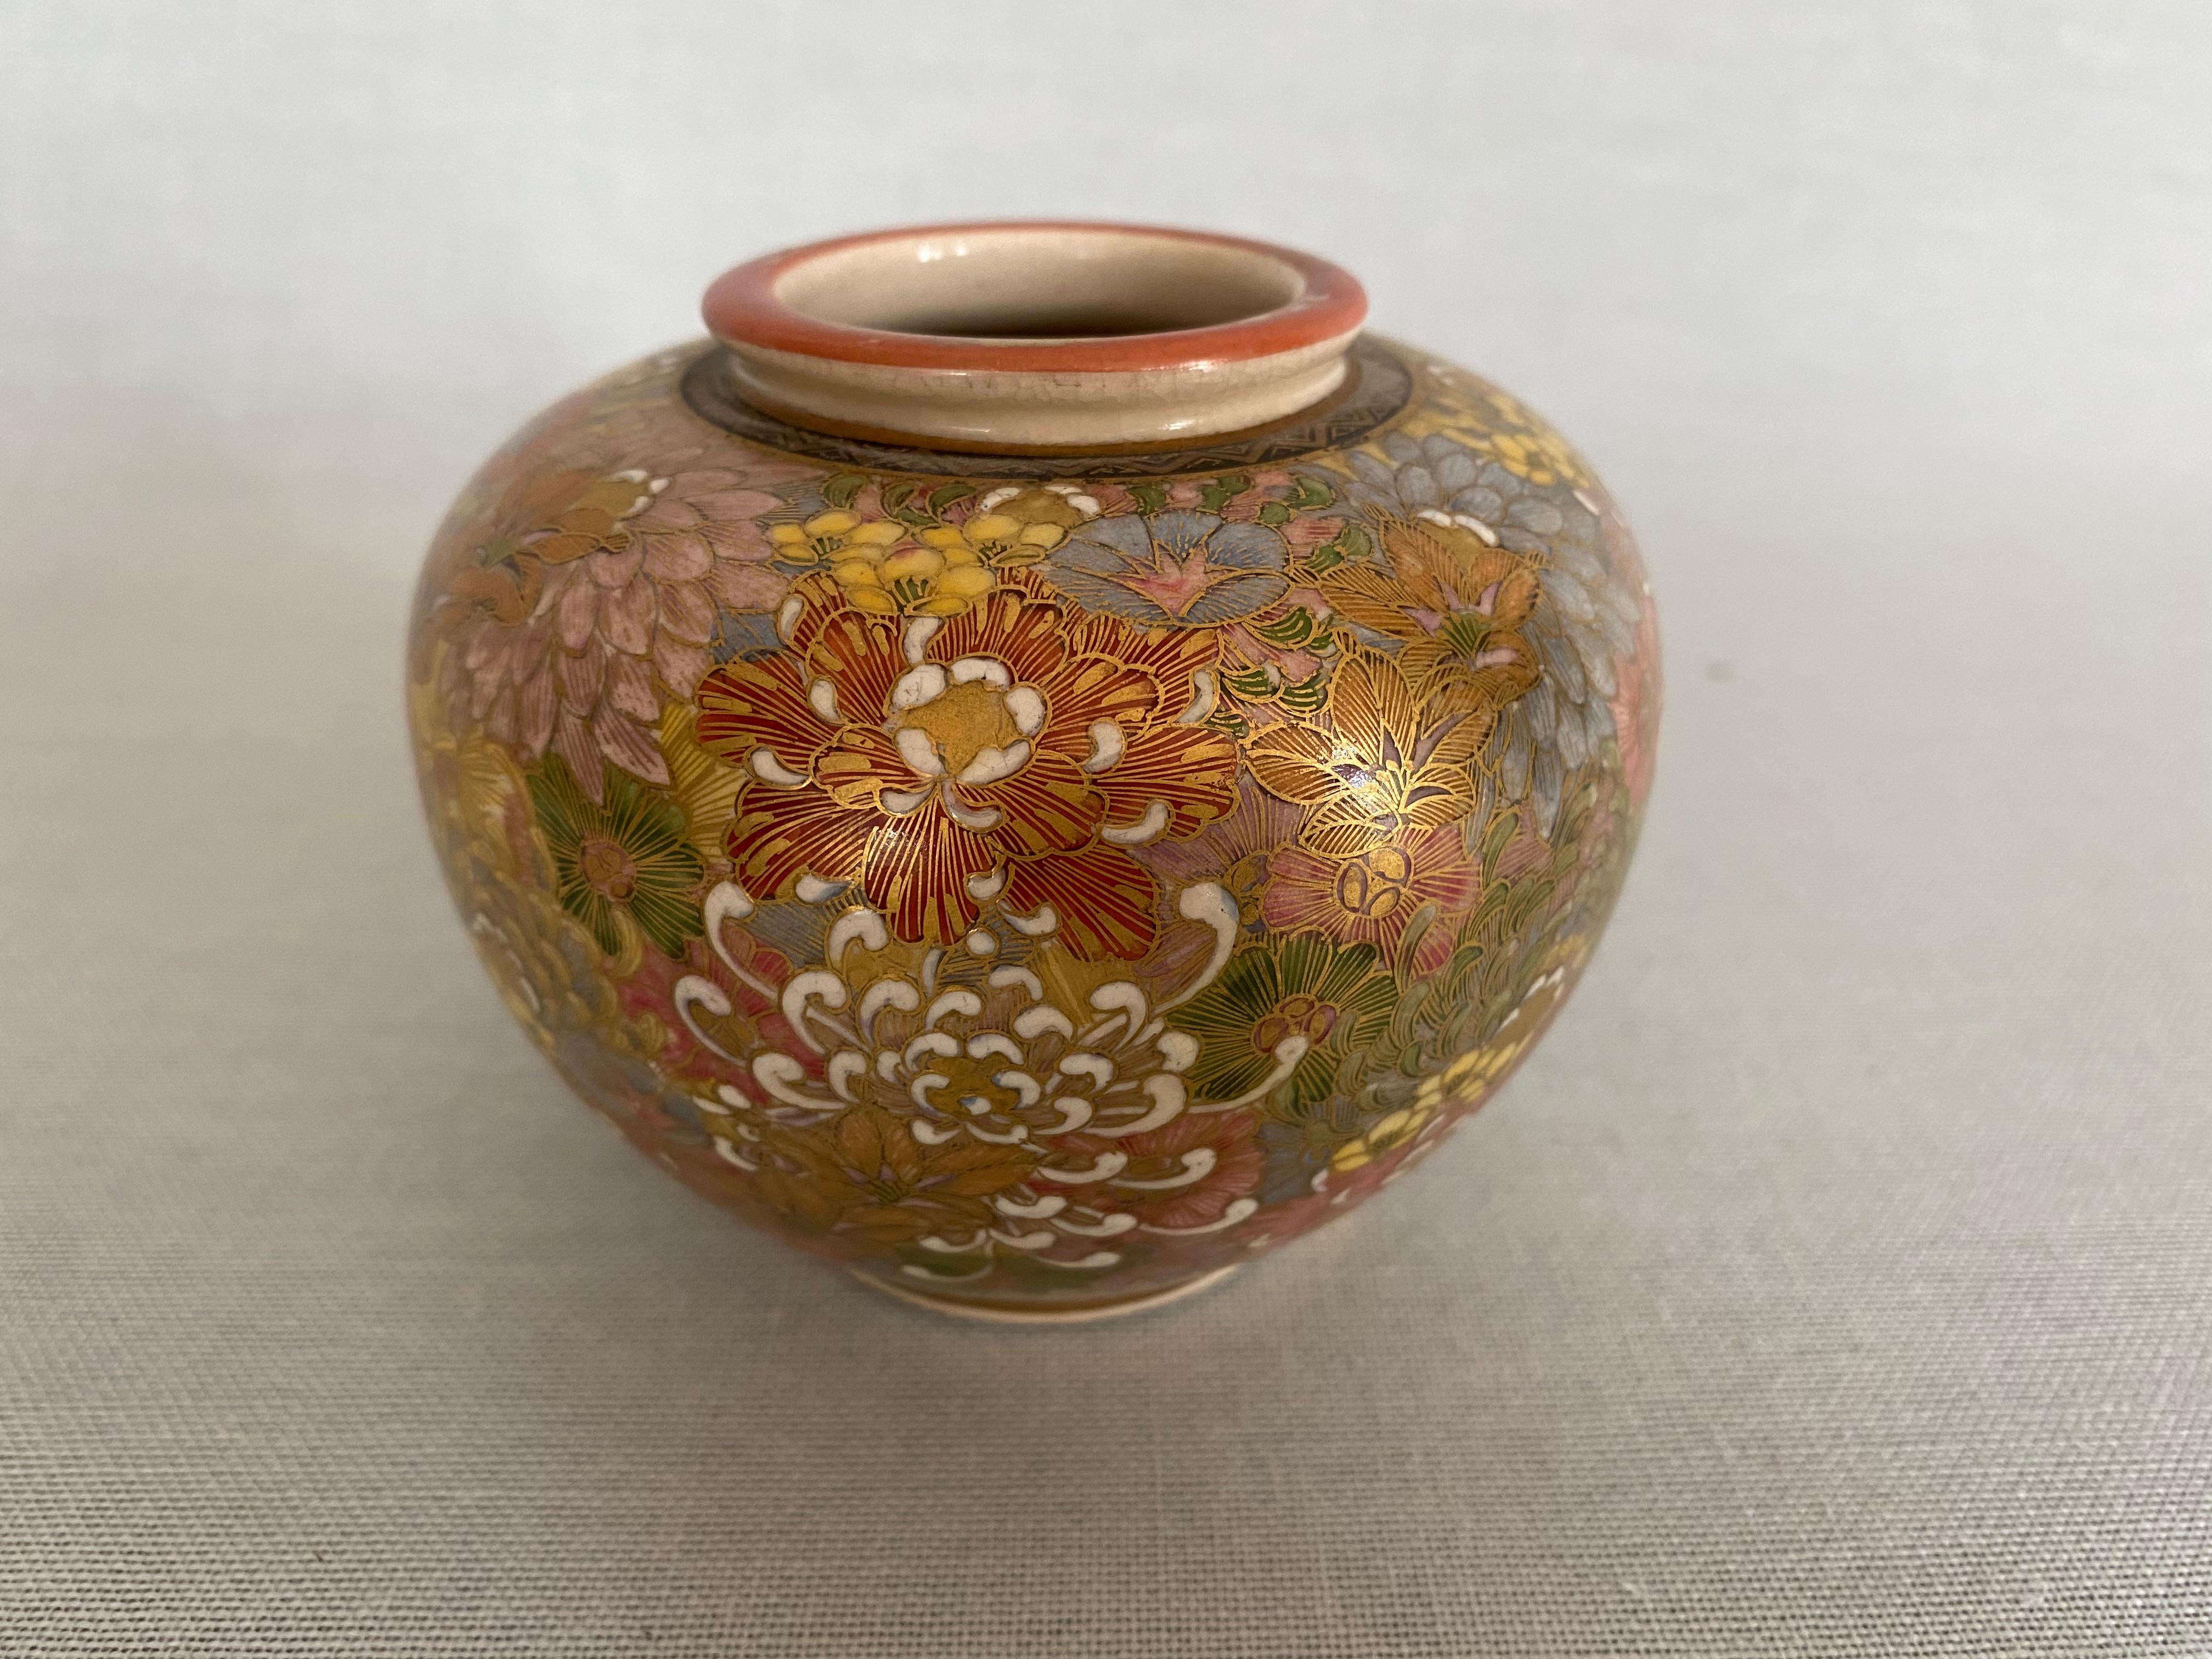 A round vase decorated with various flowers, colorful chrysanthemum-filled ground emulating the Chinese style of porcelain known as mille fleur. Each leaf and detail with a fine gold outline.
Signed underneath with additional Shimanzu